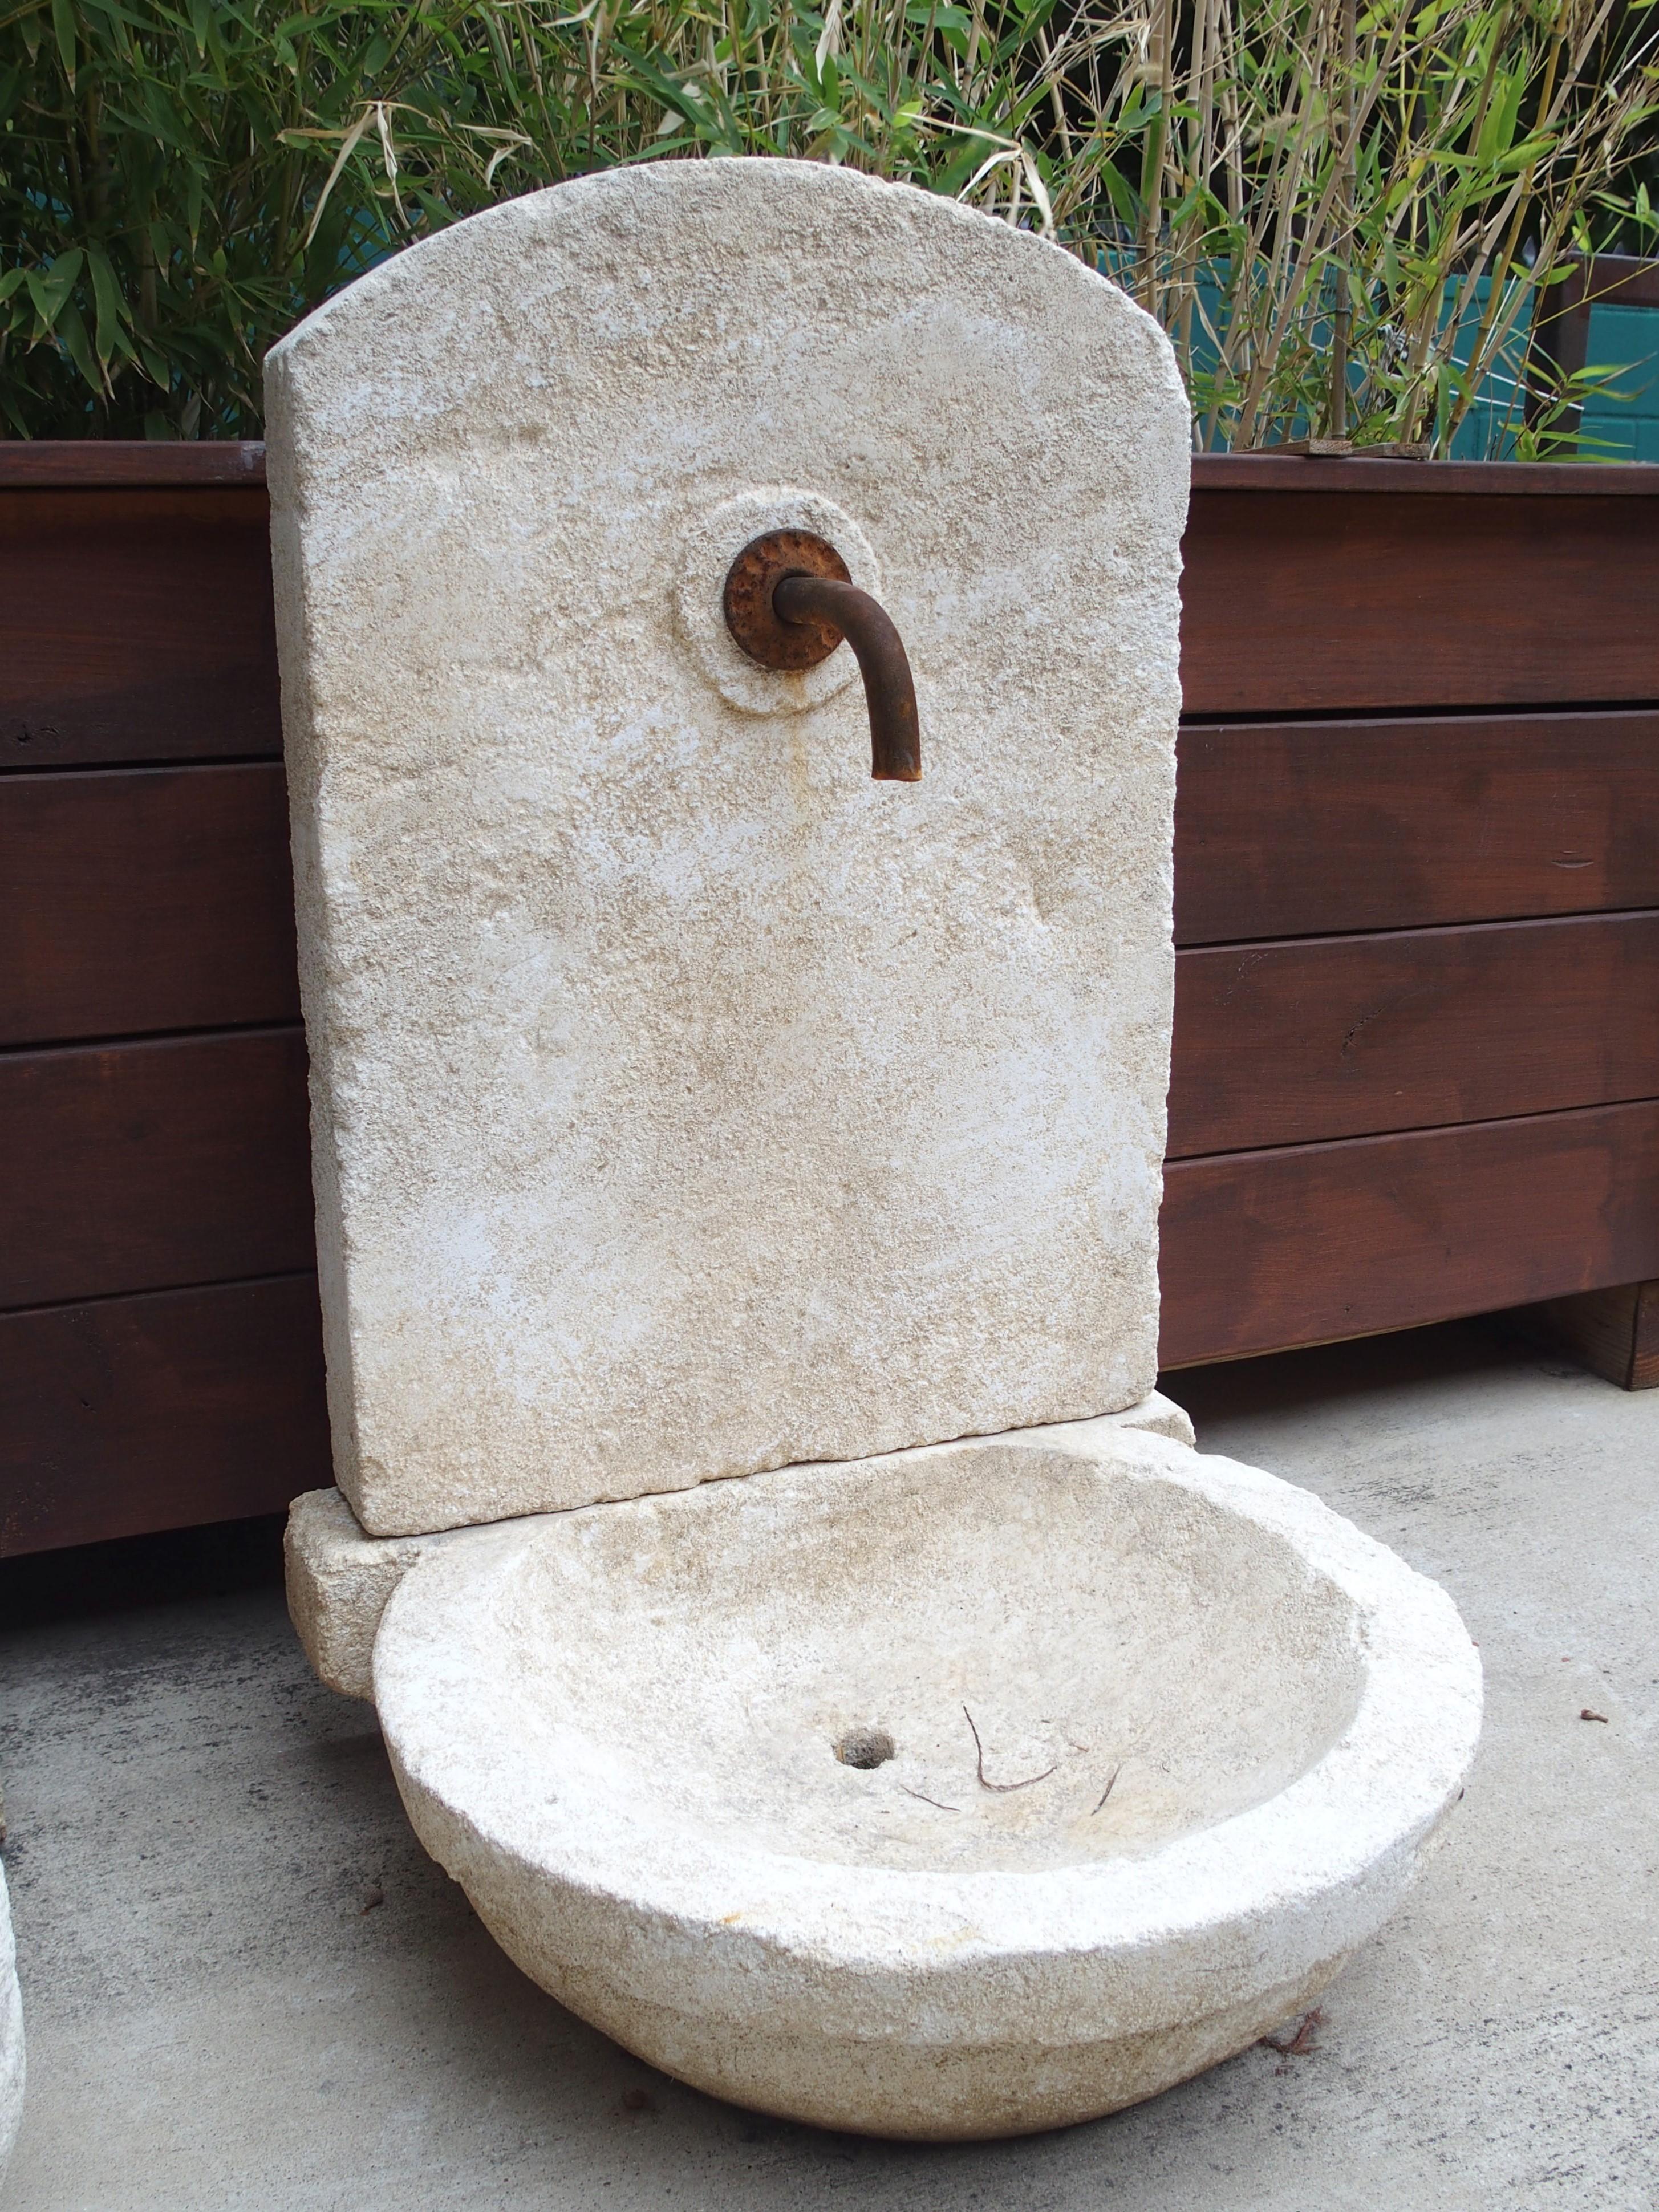 This small wall fountain from Provence, France, has been hand-carved in two sections from Estaillade limestone. The back of the round basin was carved with a thick horizontal ridge, which functions as a support for the arched back wall. An iron